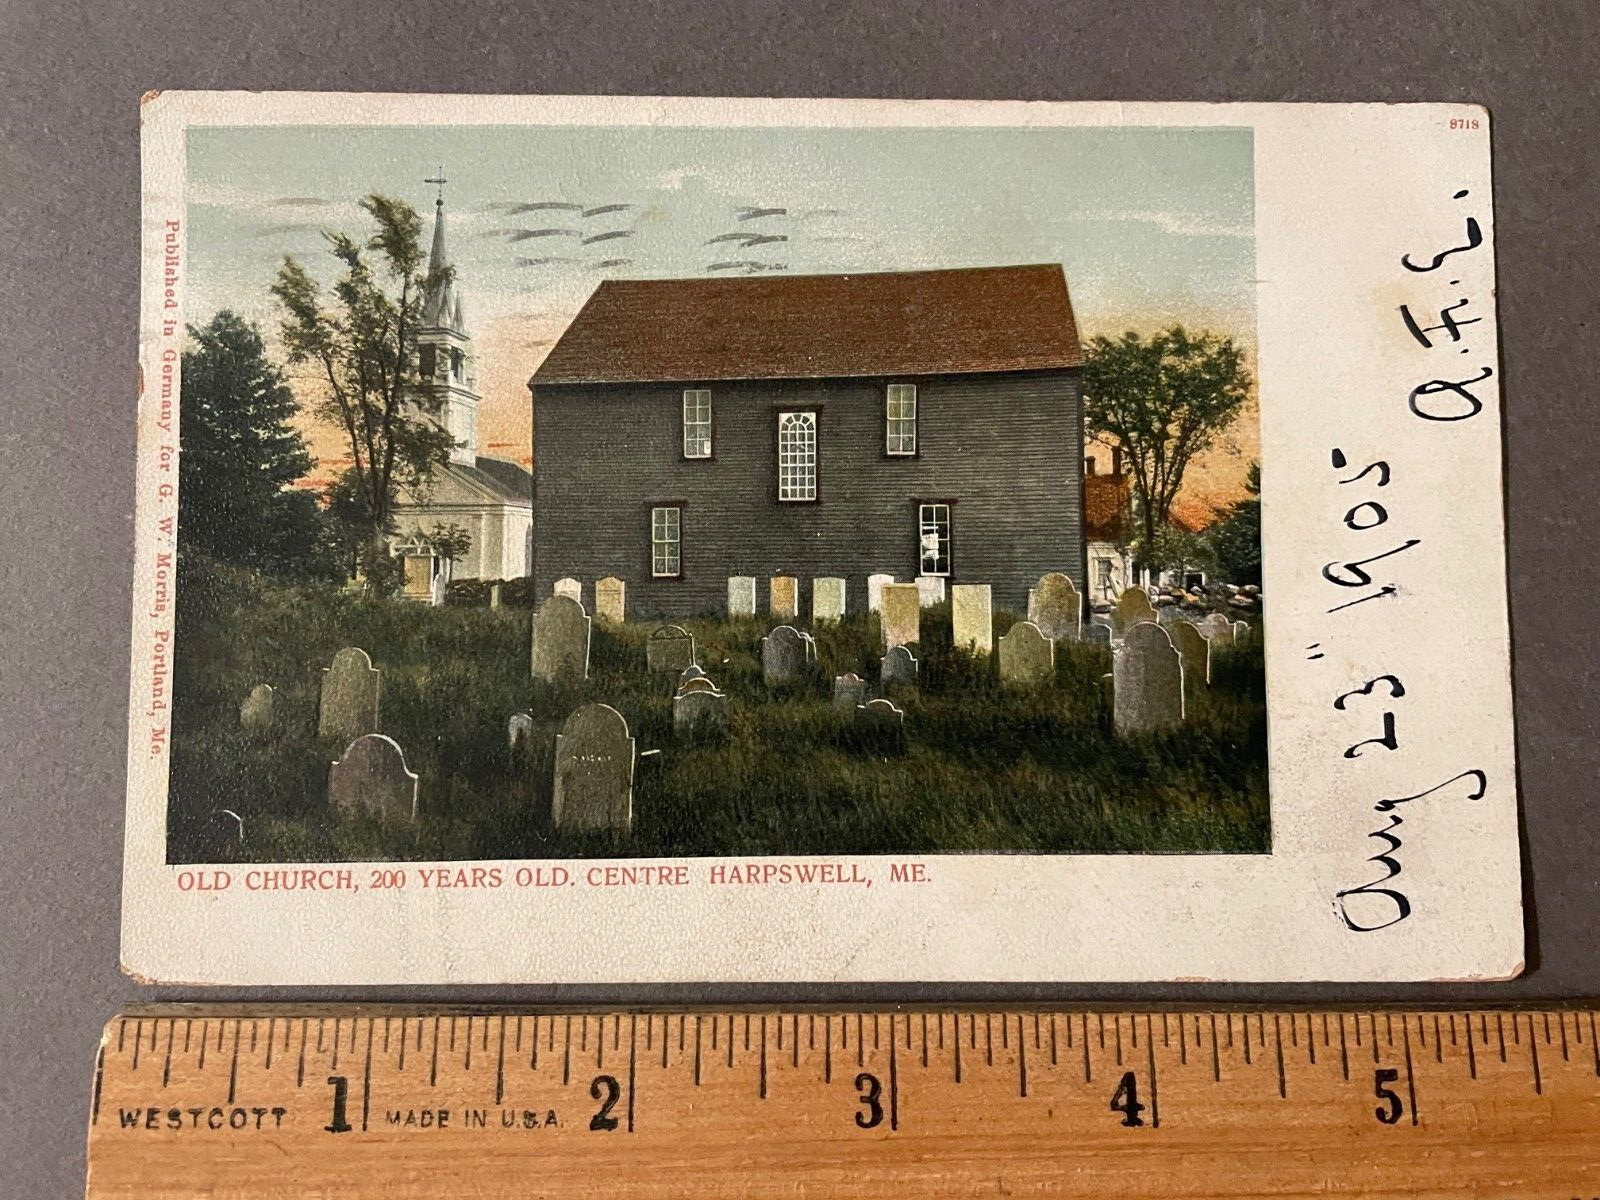 ANTIQUE VINTAGE OLD CHURCH CENTRE HARPSWELL, ME POSTCARD